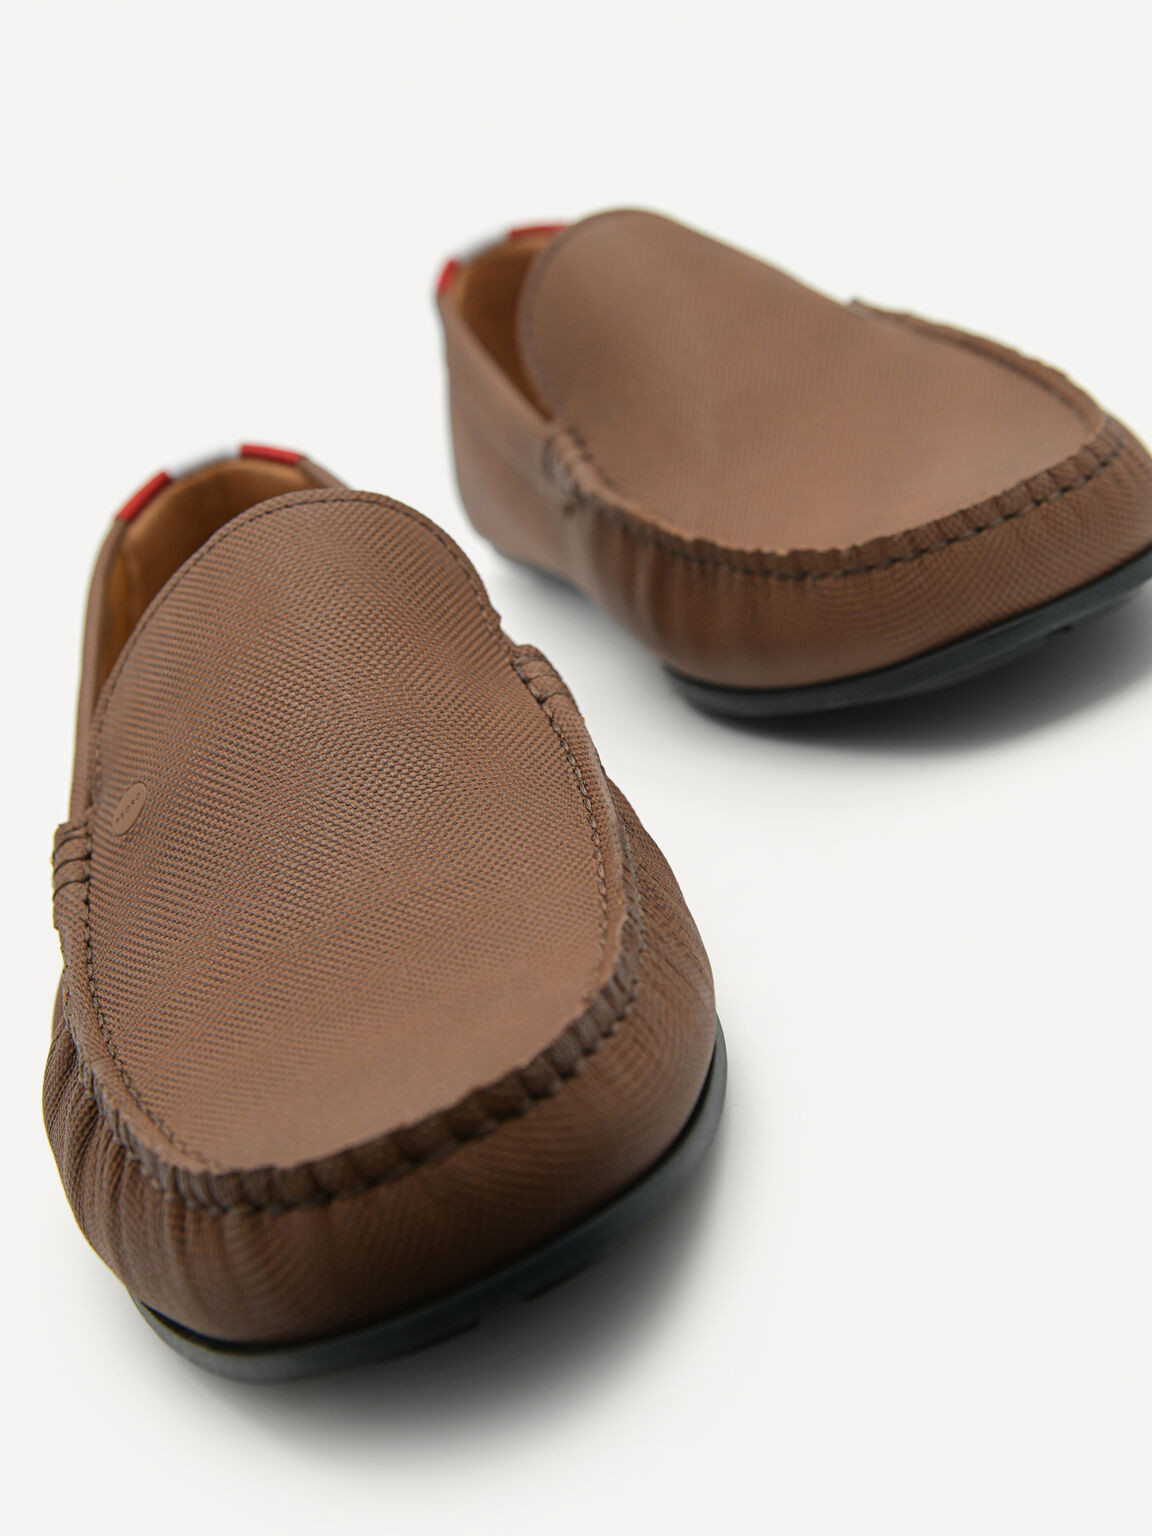 Leather & Fabric Slip-On Loafers, Brown